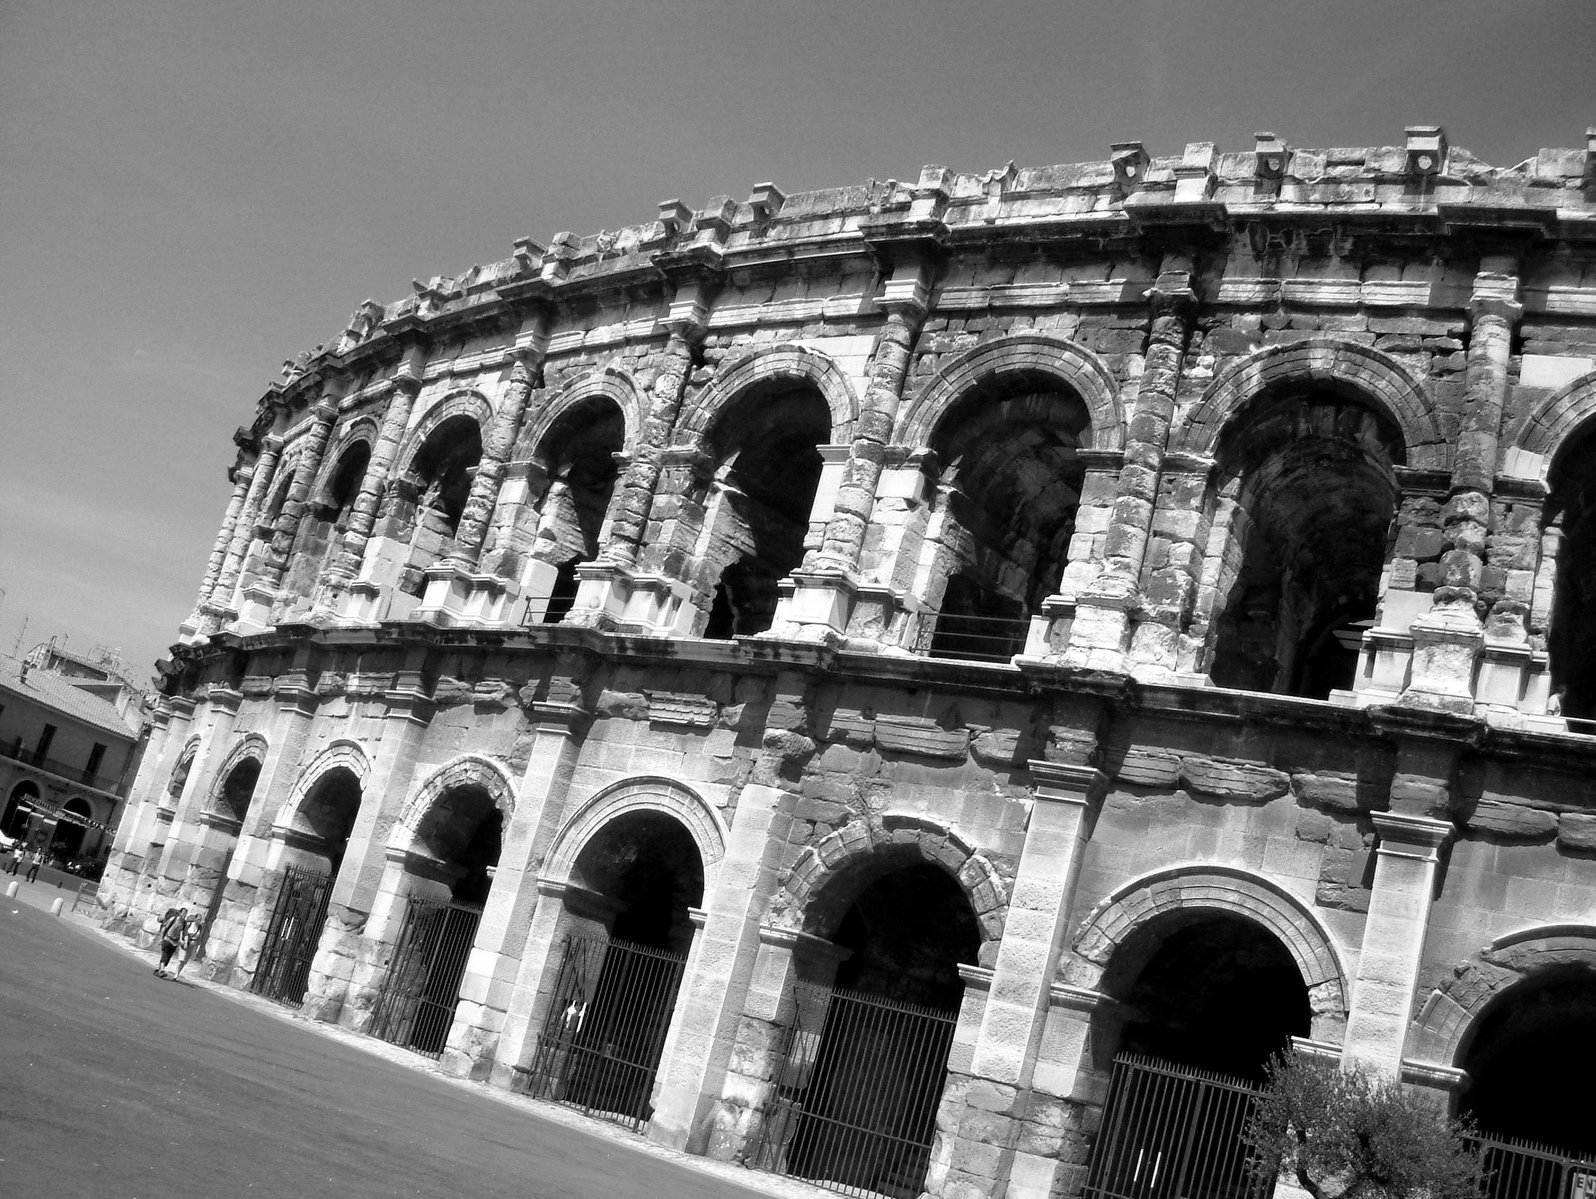 an image of a bull arena in a black and white po